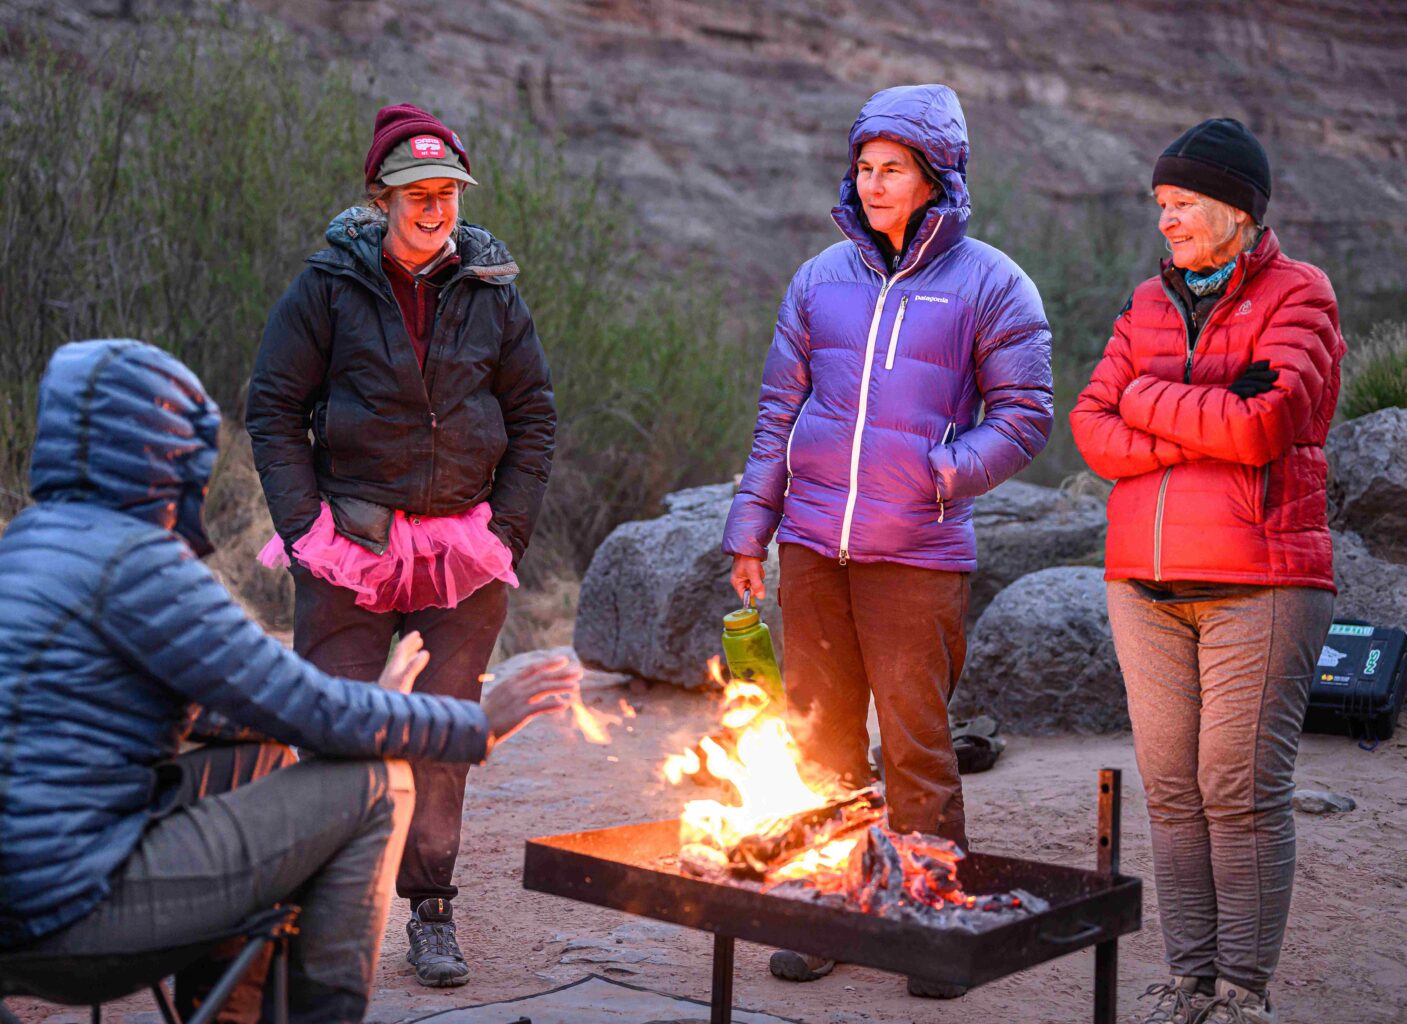 A group of OARS guests and guides stand around a camp fire on a cold rafting trip